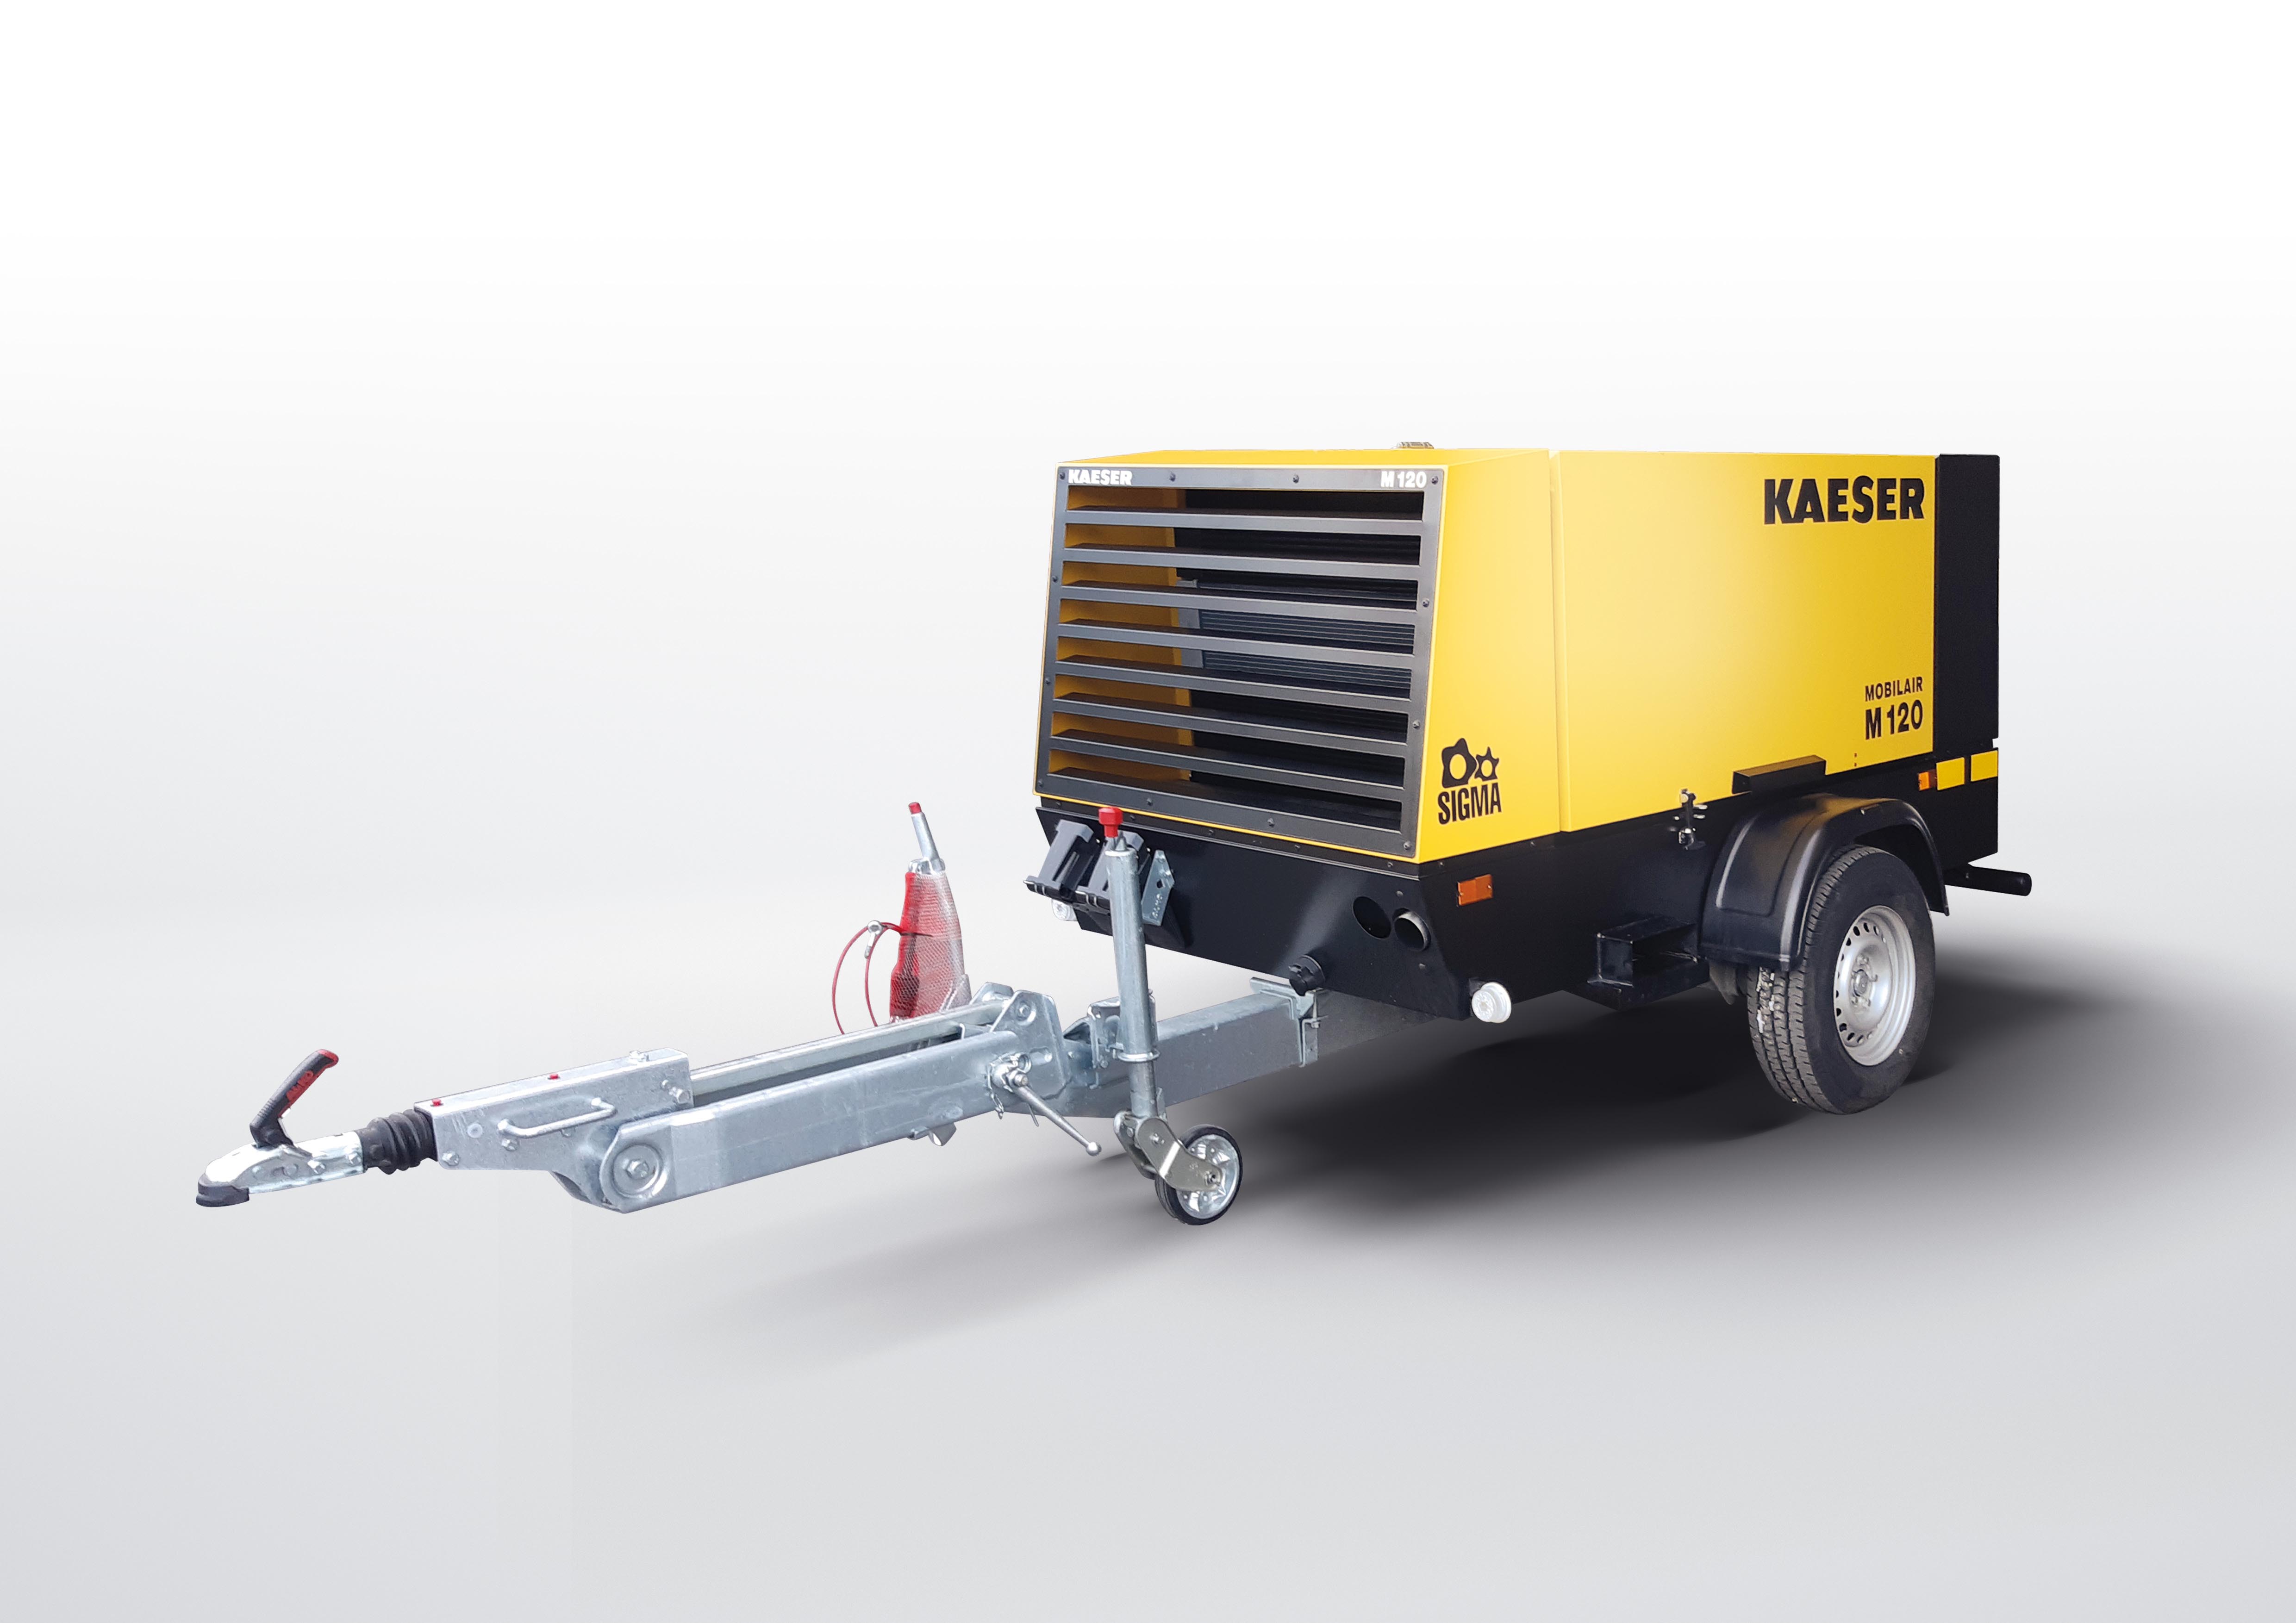 The M120 is a high-performance portable compressor that can run on fuel with a high sulphur content.